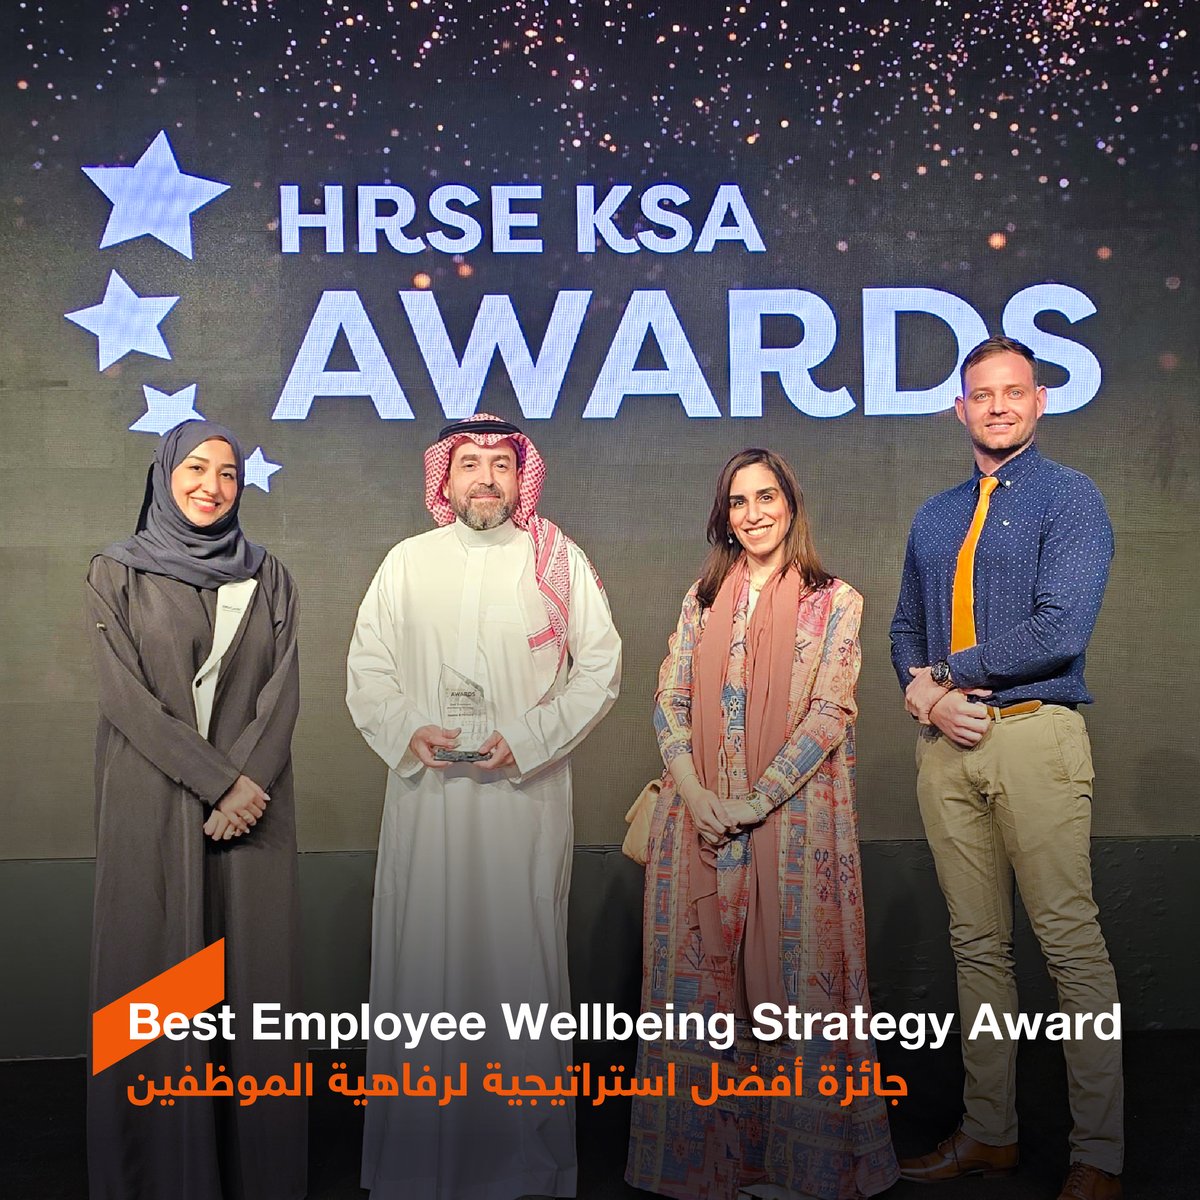 Honored and thankful to receive the Best Employee Wellbeing Strategy Award at the HRSE KSA Awards 2024. This recognition stands to show our continued dedication to the welfare and success of our teams.

#TogetherWeBuildExcellence